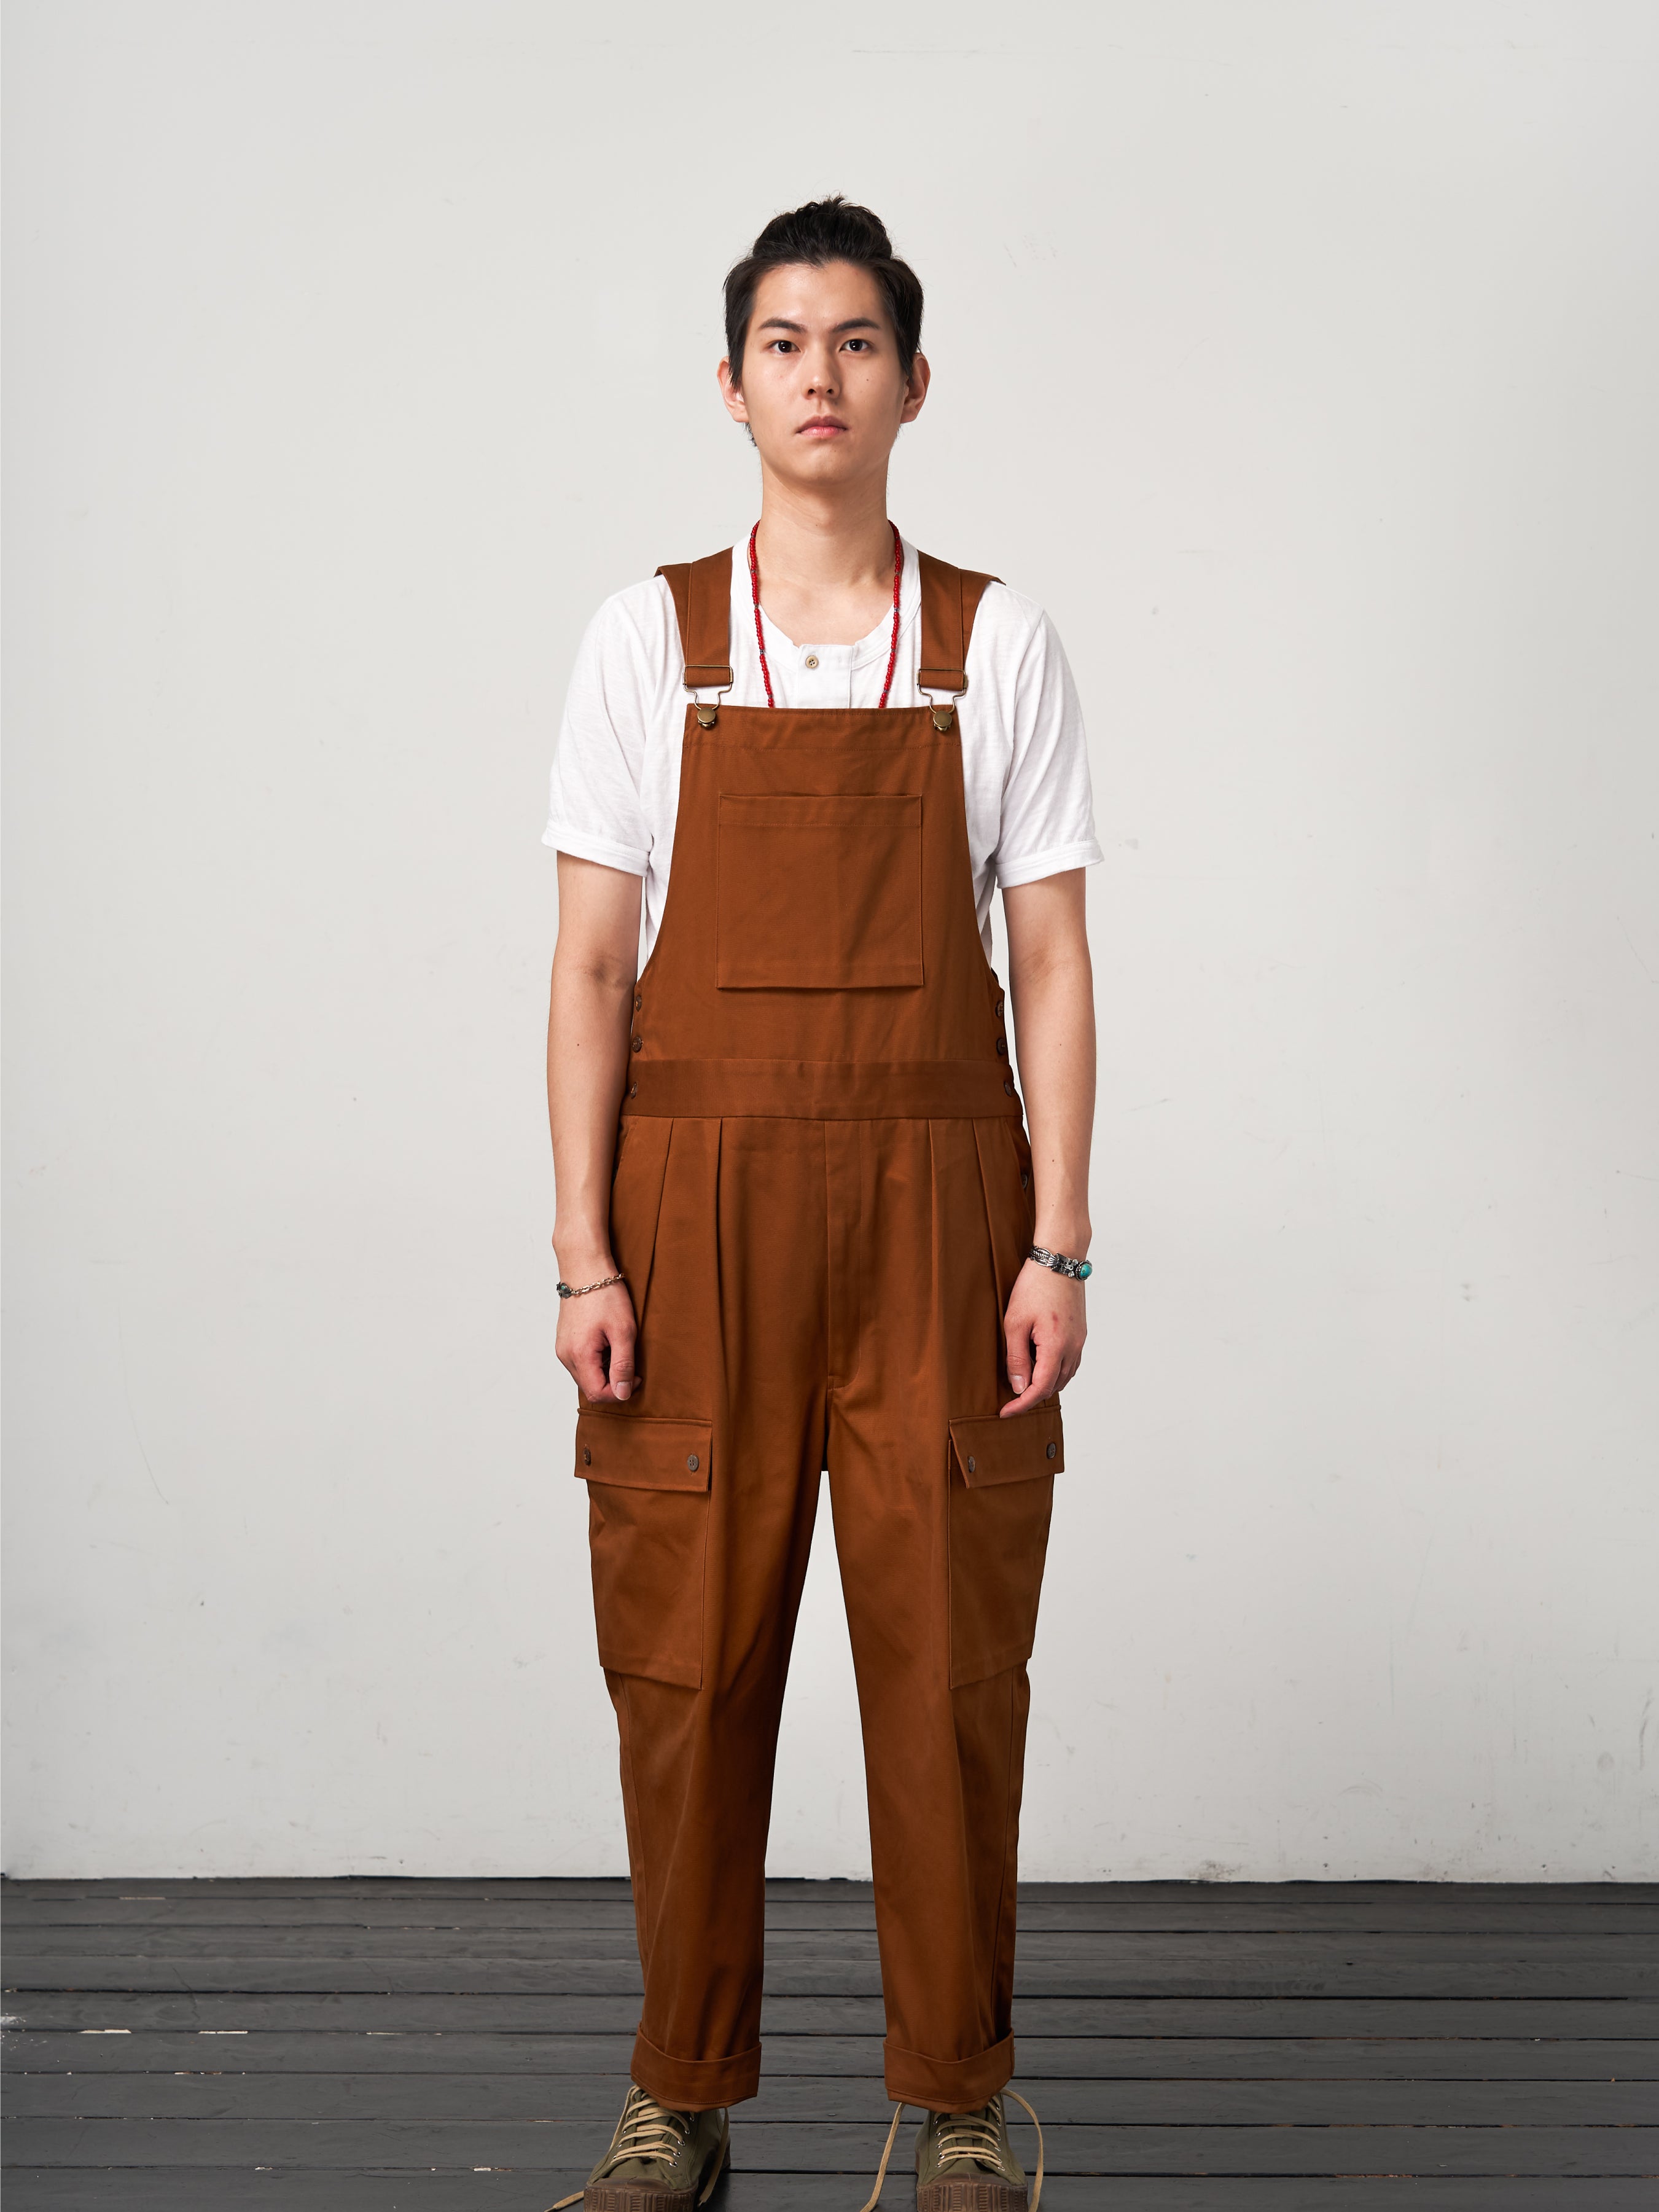 Military Overalls